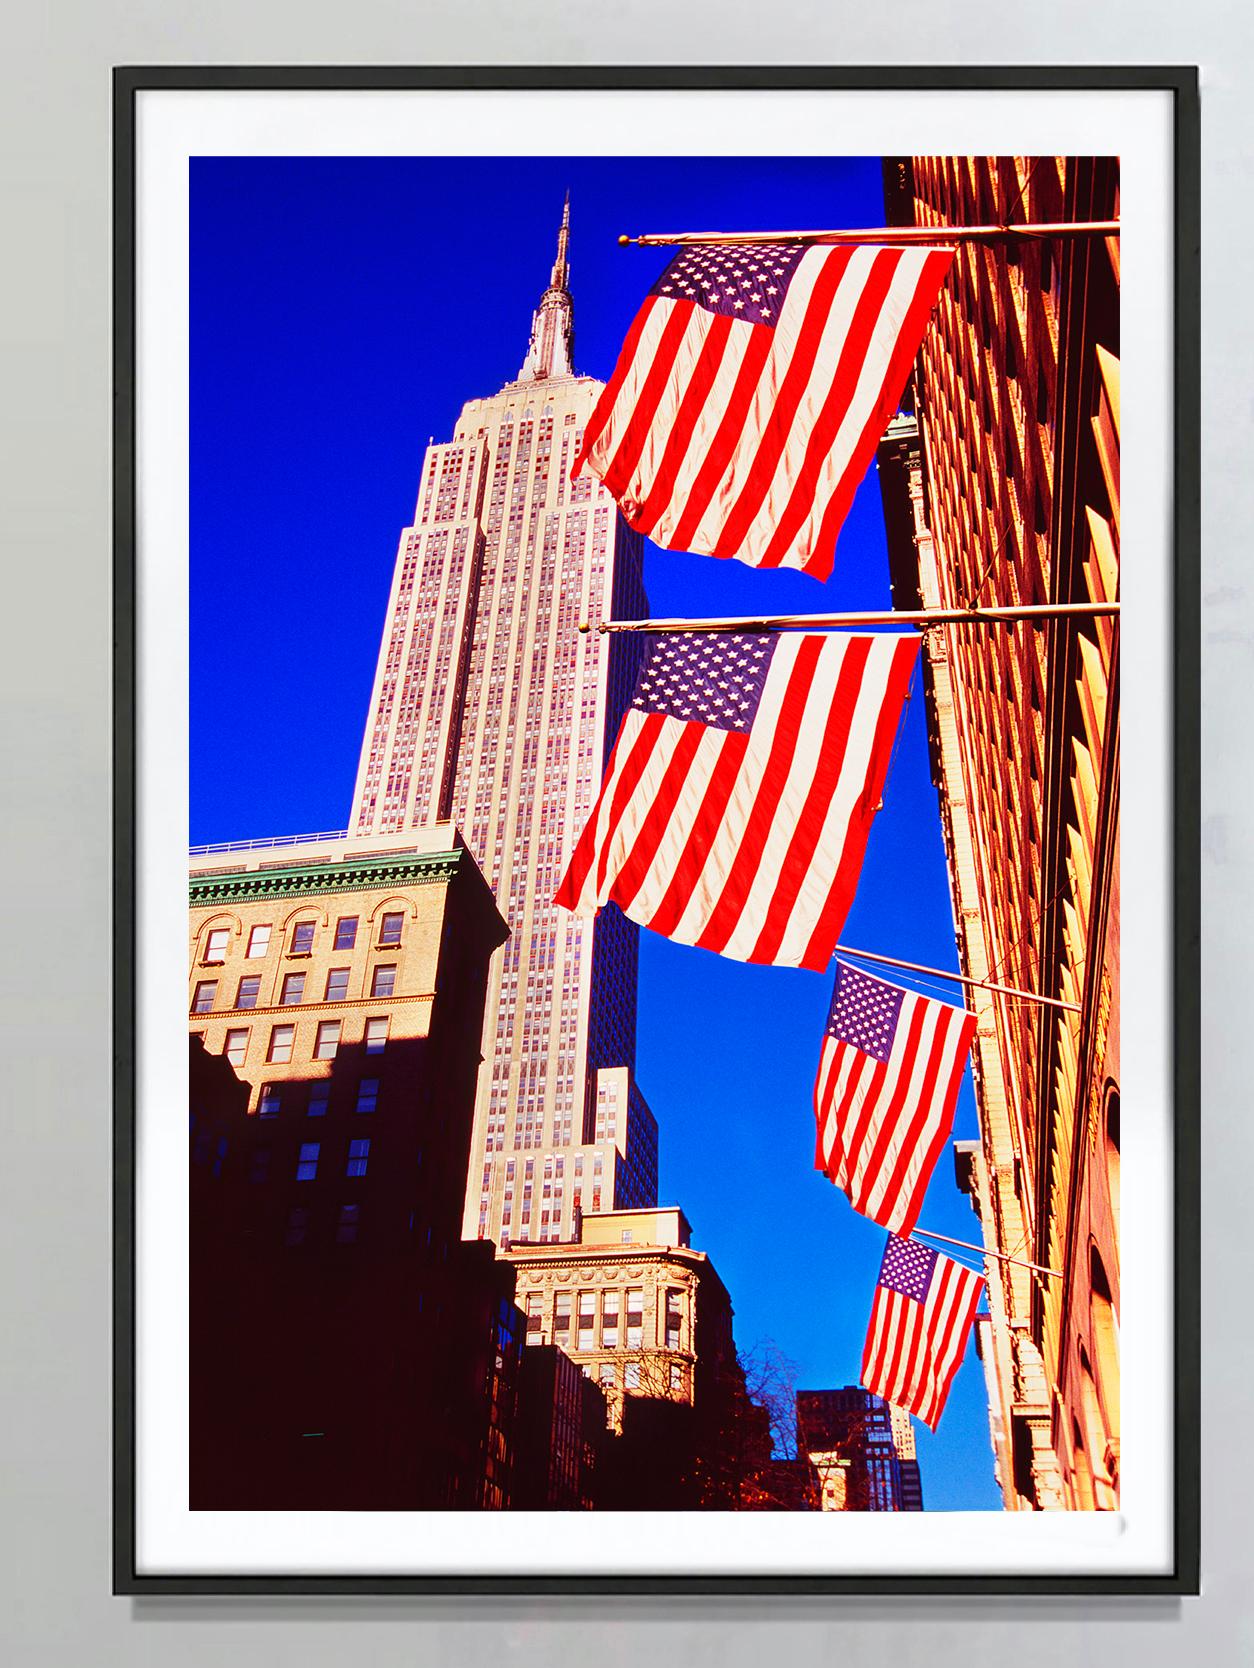 Empire State Building And American Flags, New York City - Photograph by Mitchell Funk